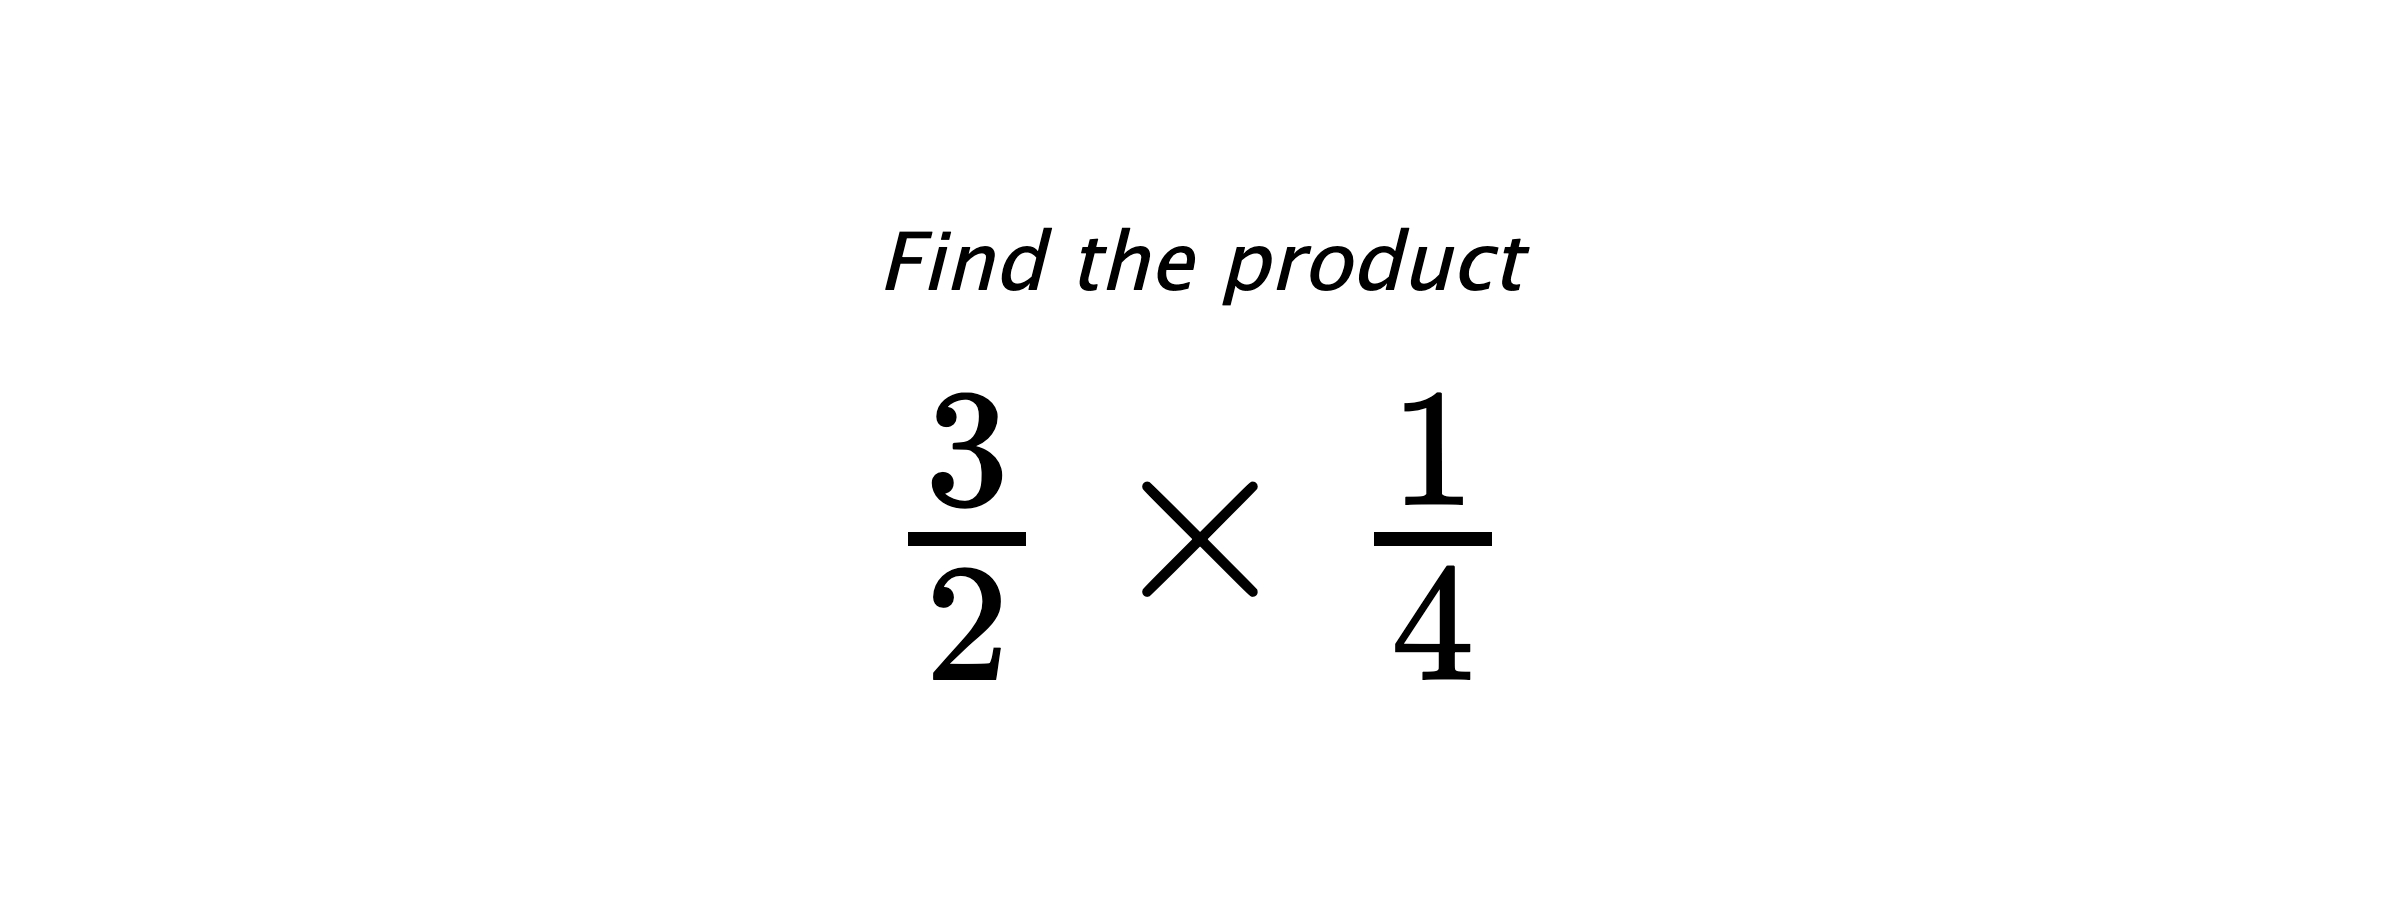 Find the product $ \frac{3}{2} \times \frac{1}{4} $